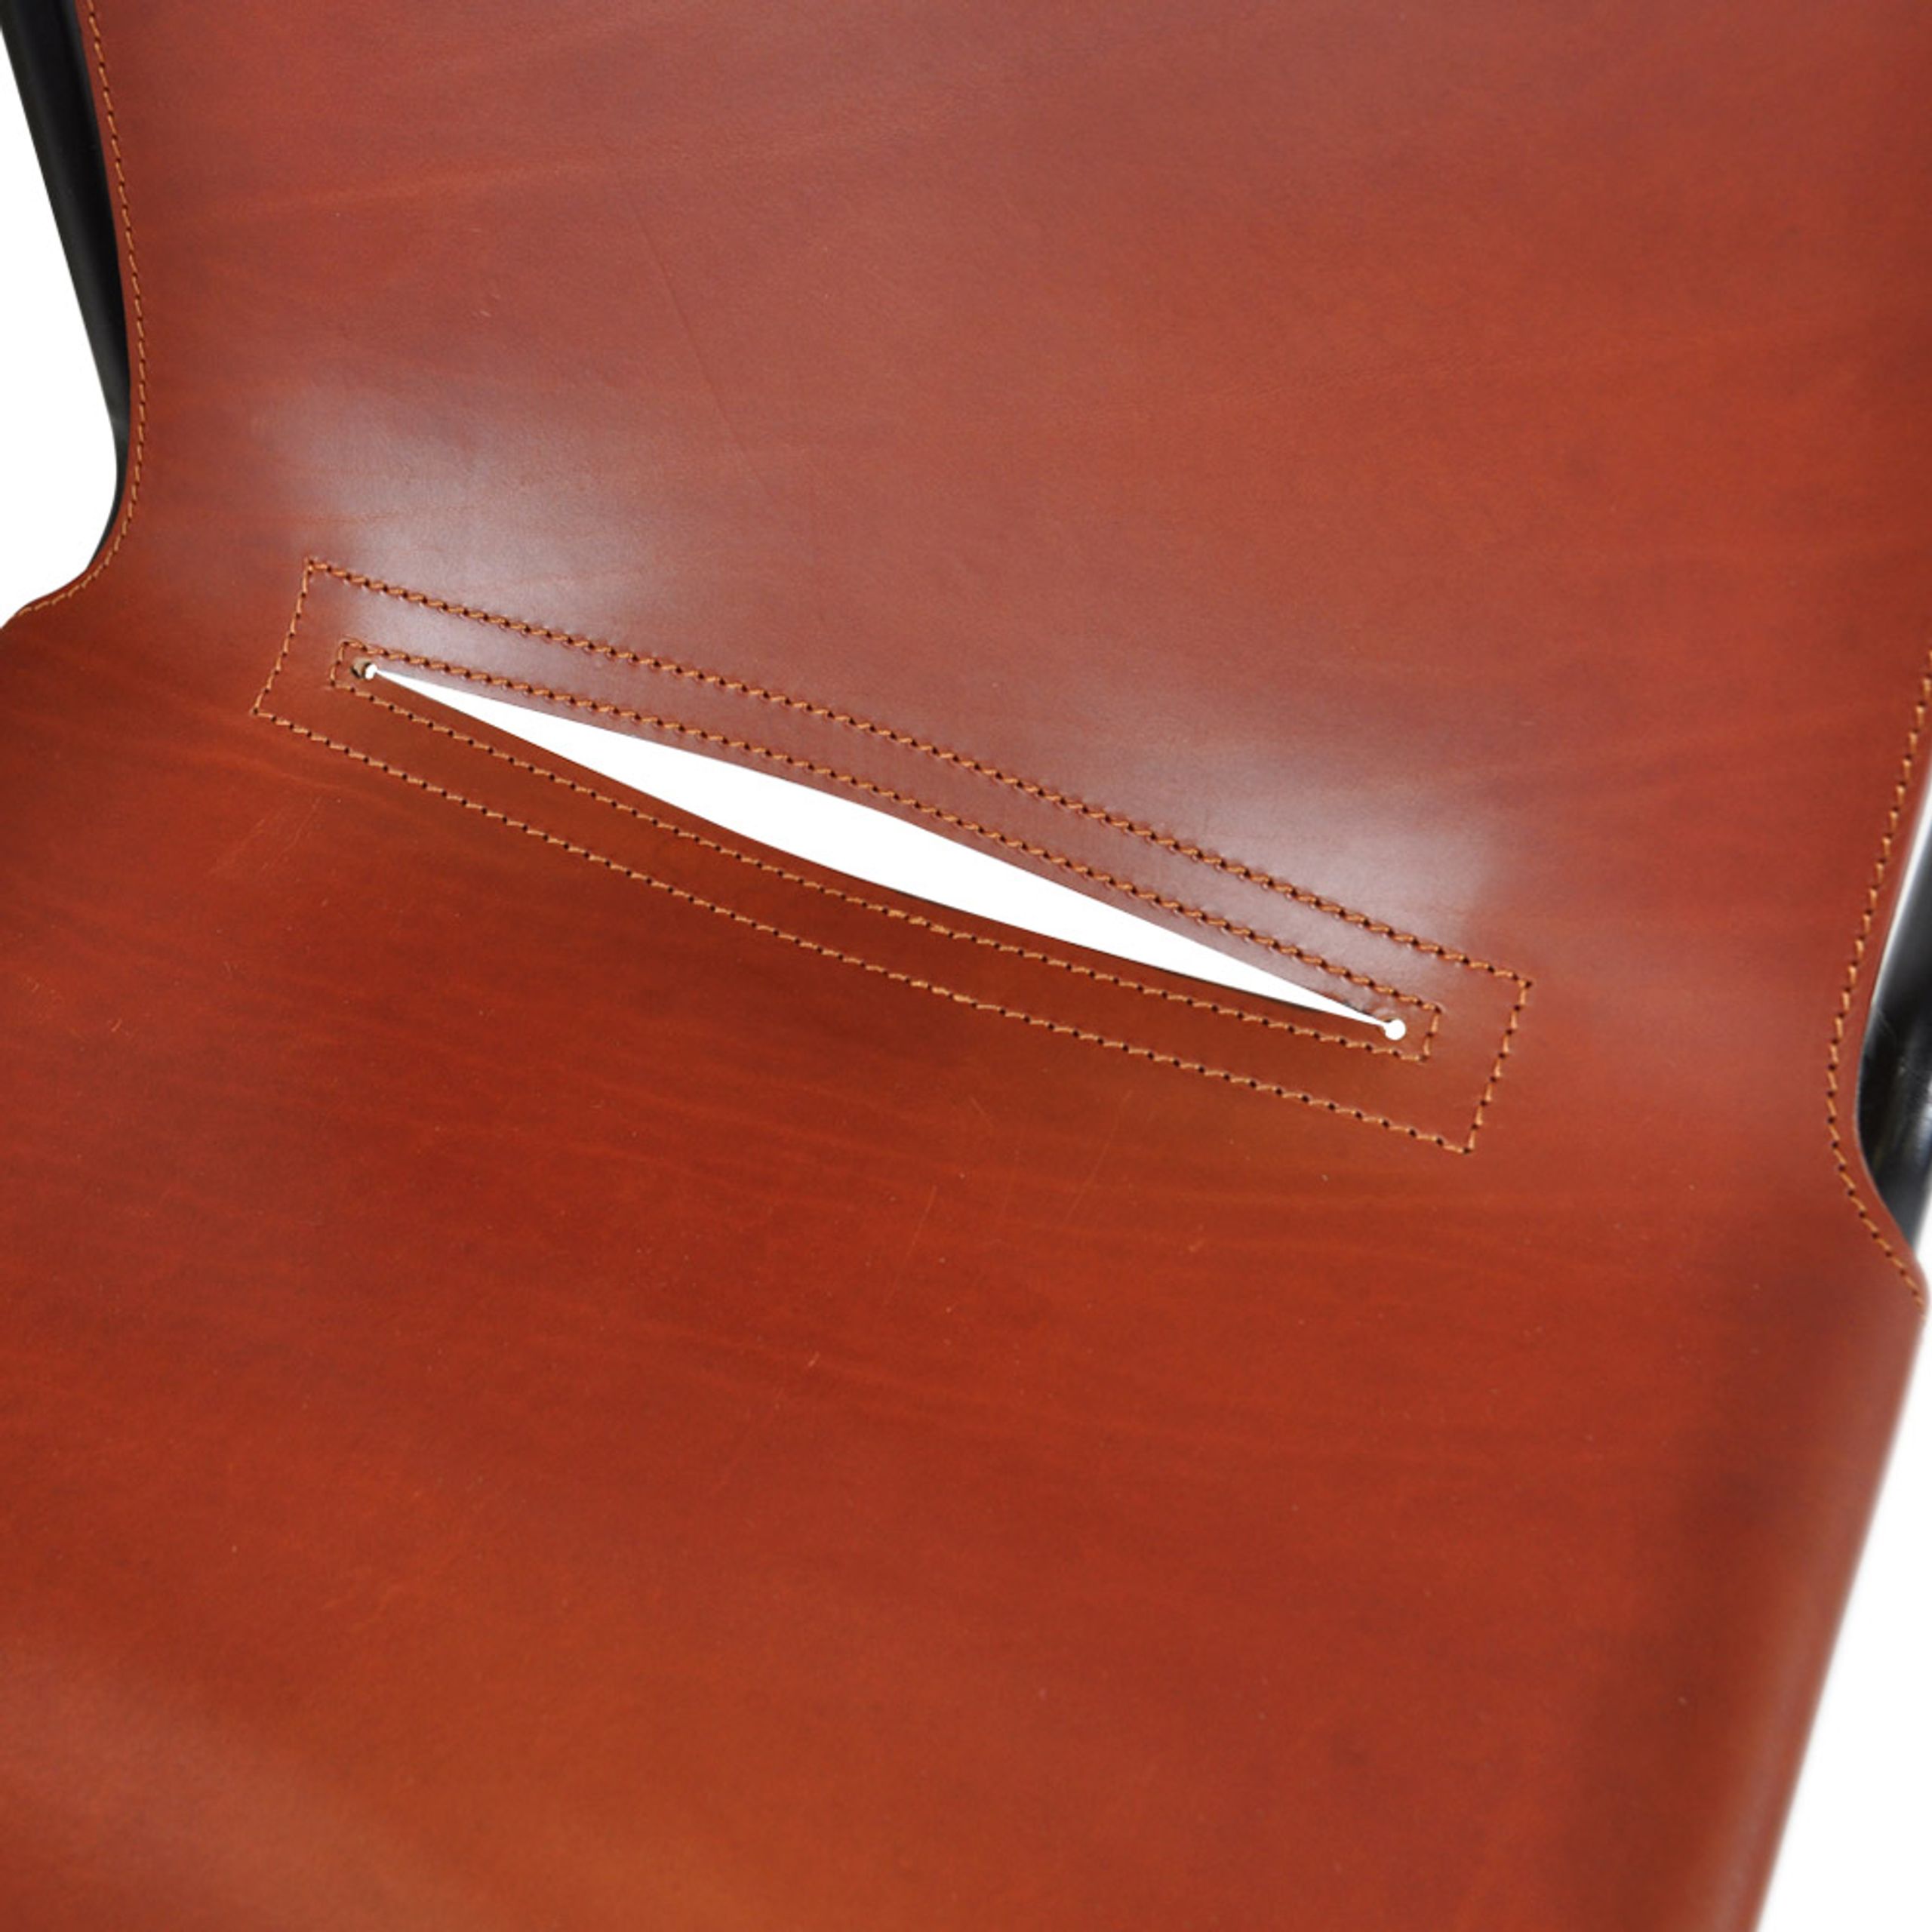 OX DENMARQ - Chaise - SEPTEMBER Dining Chair - Cognac Leather / Black Steel